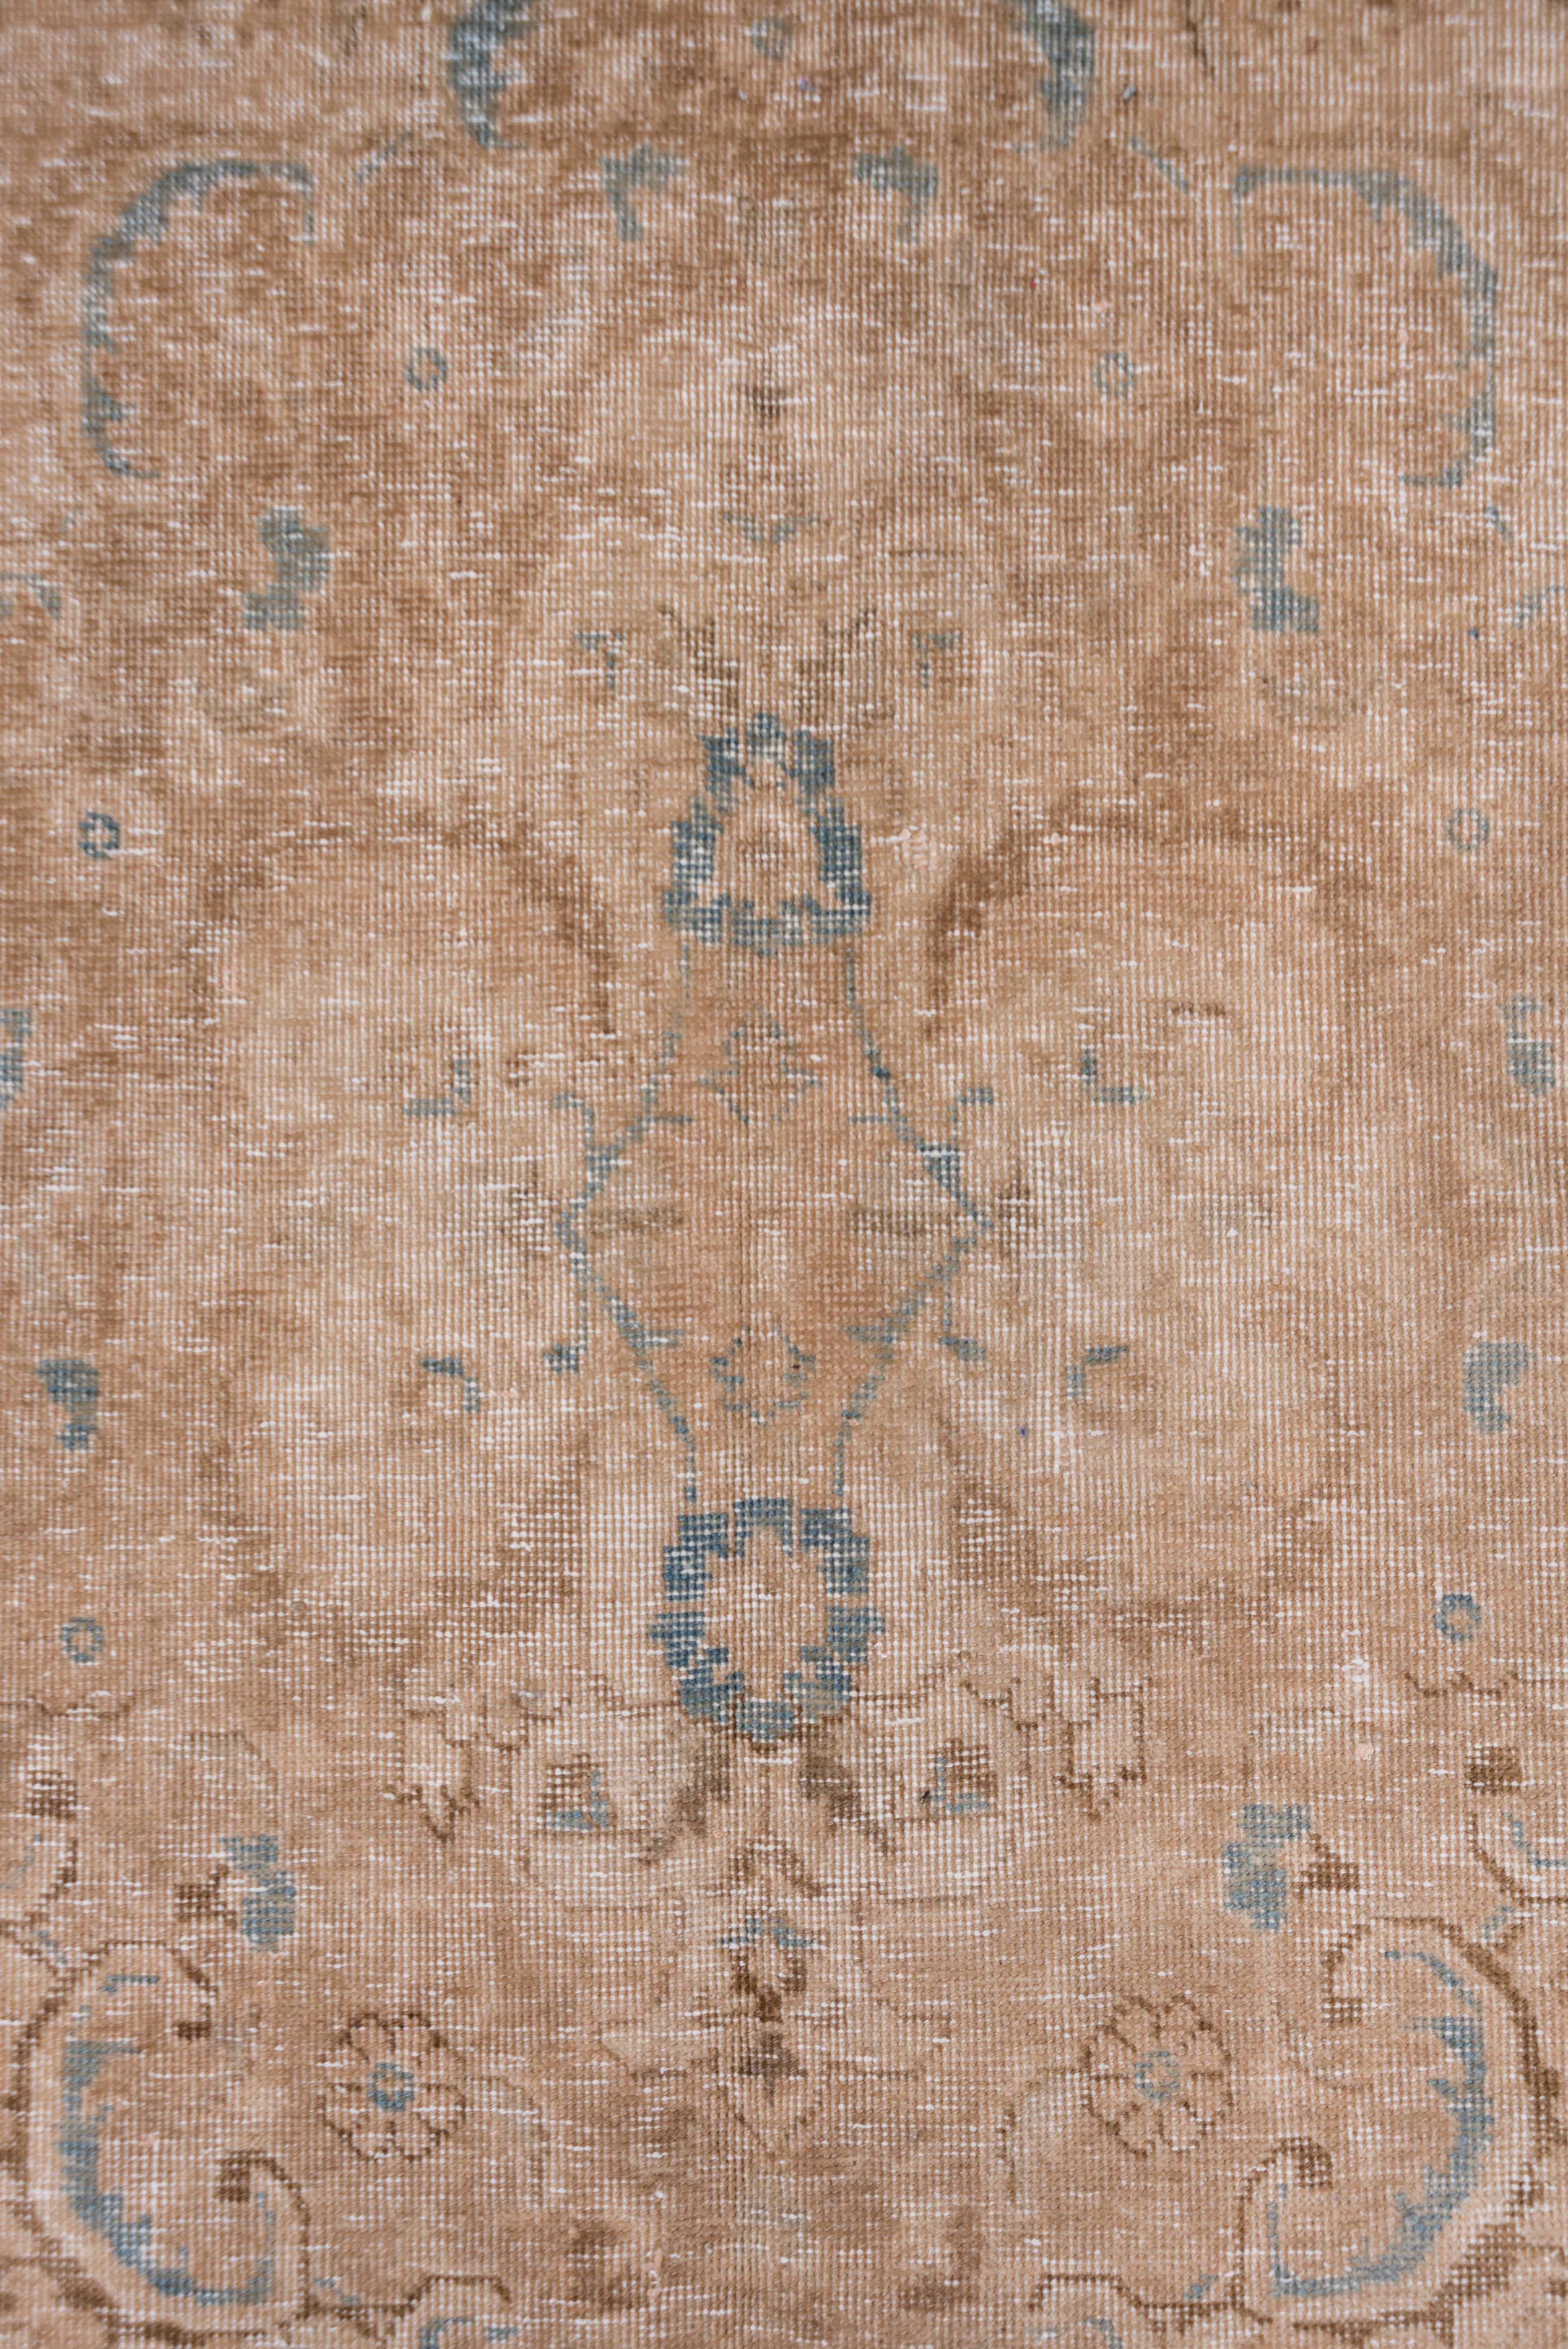 This generally distressed, flat NW Persian city carpet shows an open peachy-brown field with an acanthus- scalloped and pendanted medallion within a beige to brown main border of acanthus leaves and bottle shapes.